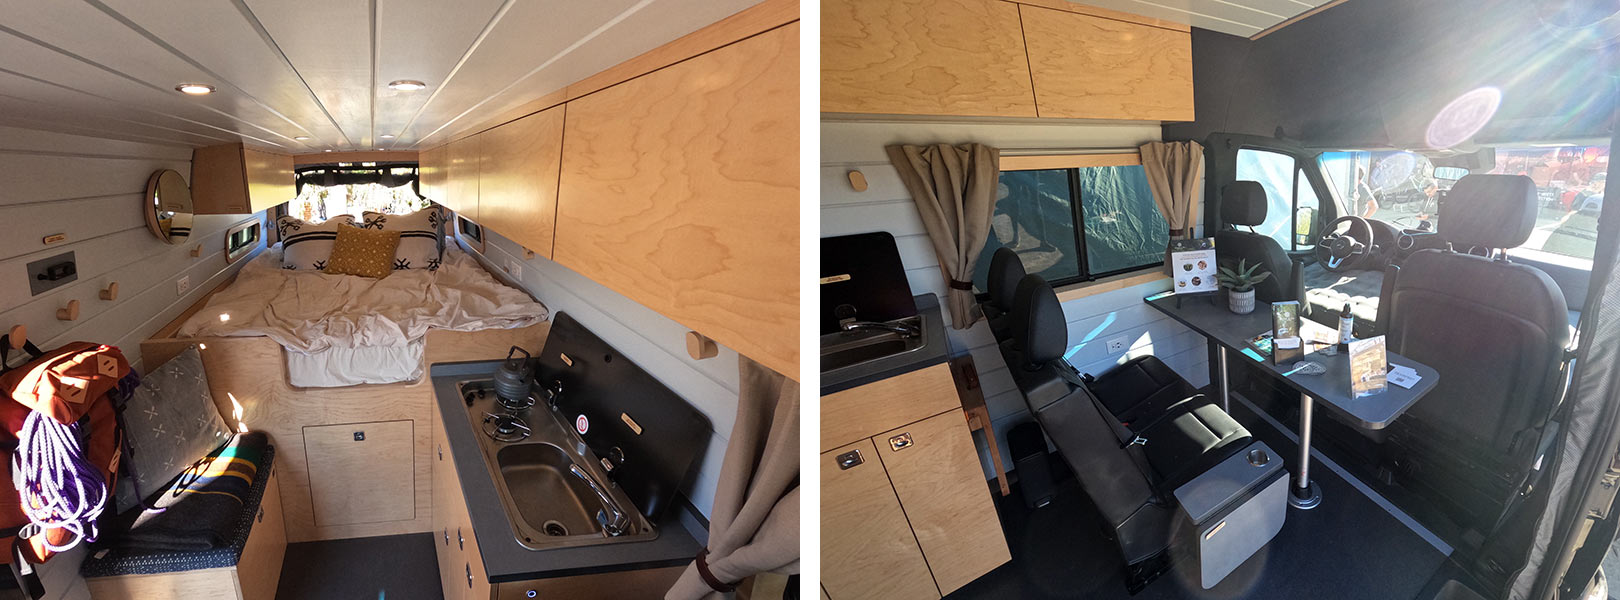 muse outdoors custom sprinter camper van with outdoor shower hose and premium kitchen